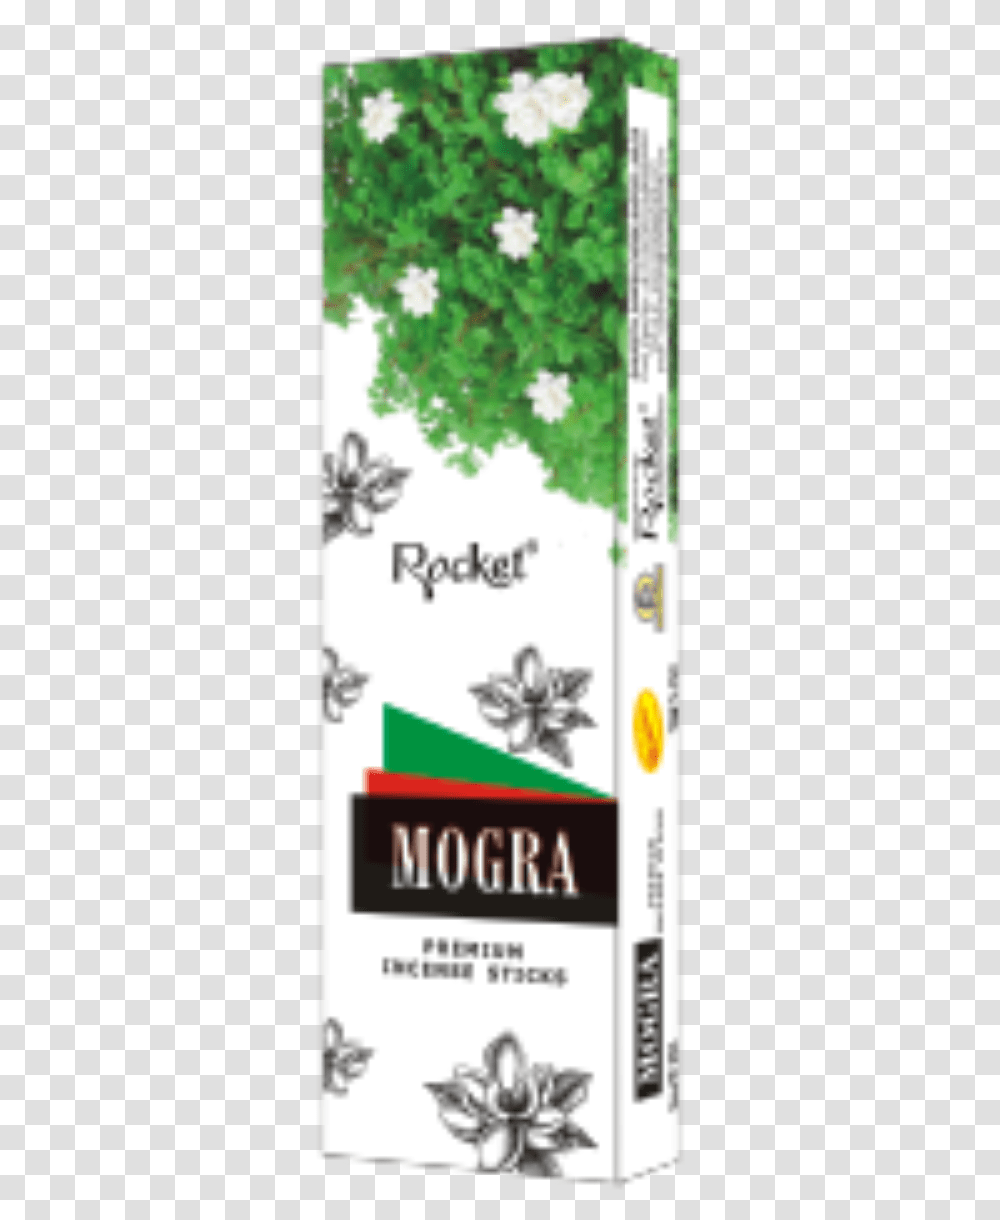 Greenmogra A Economybox Cow Parsley, Label, Paper, Poster Transparent Png